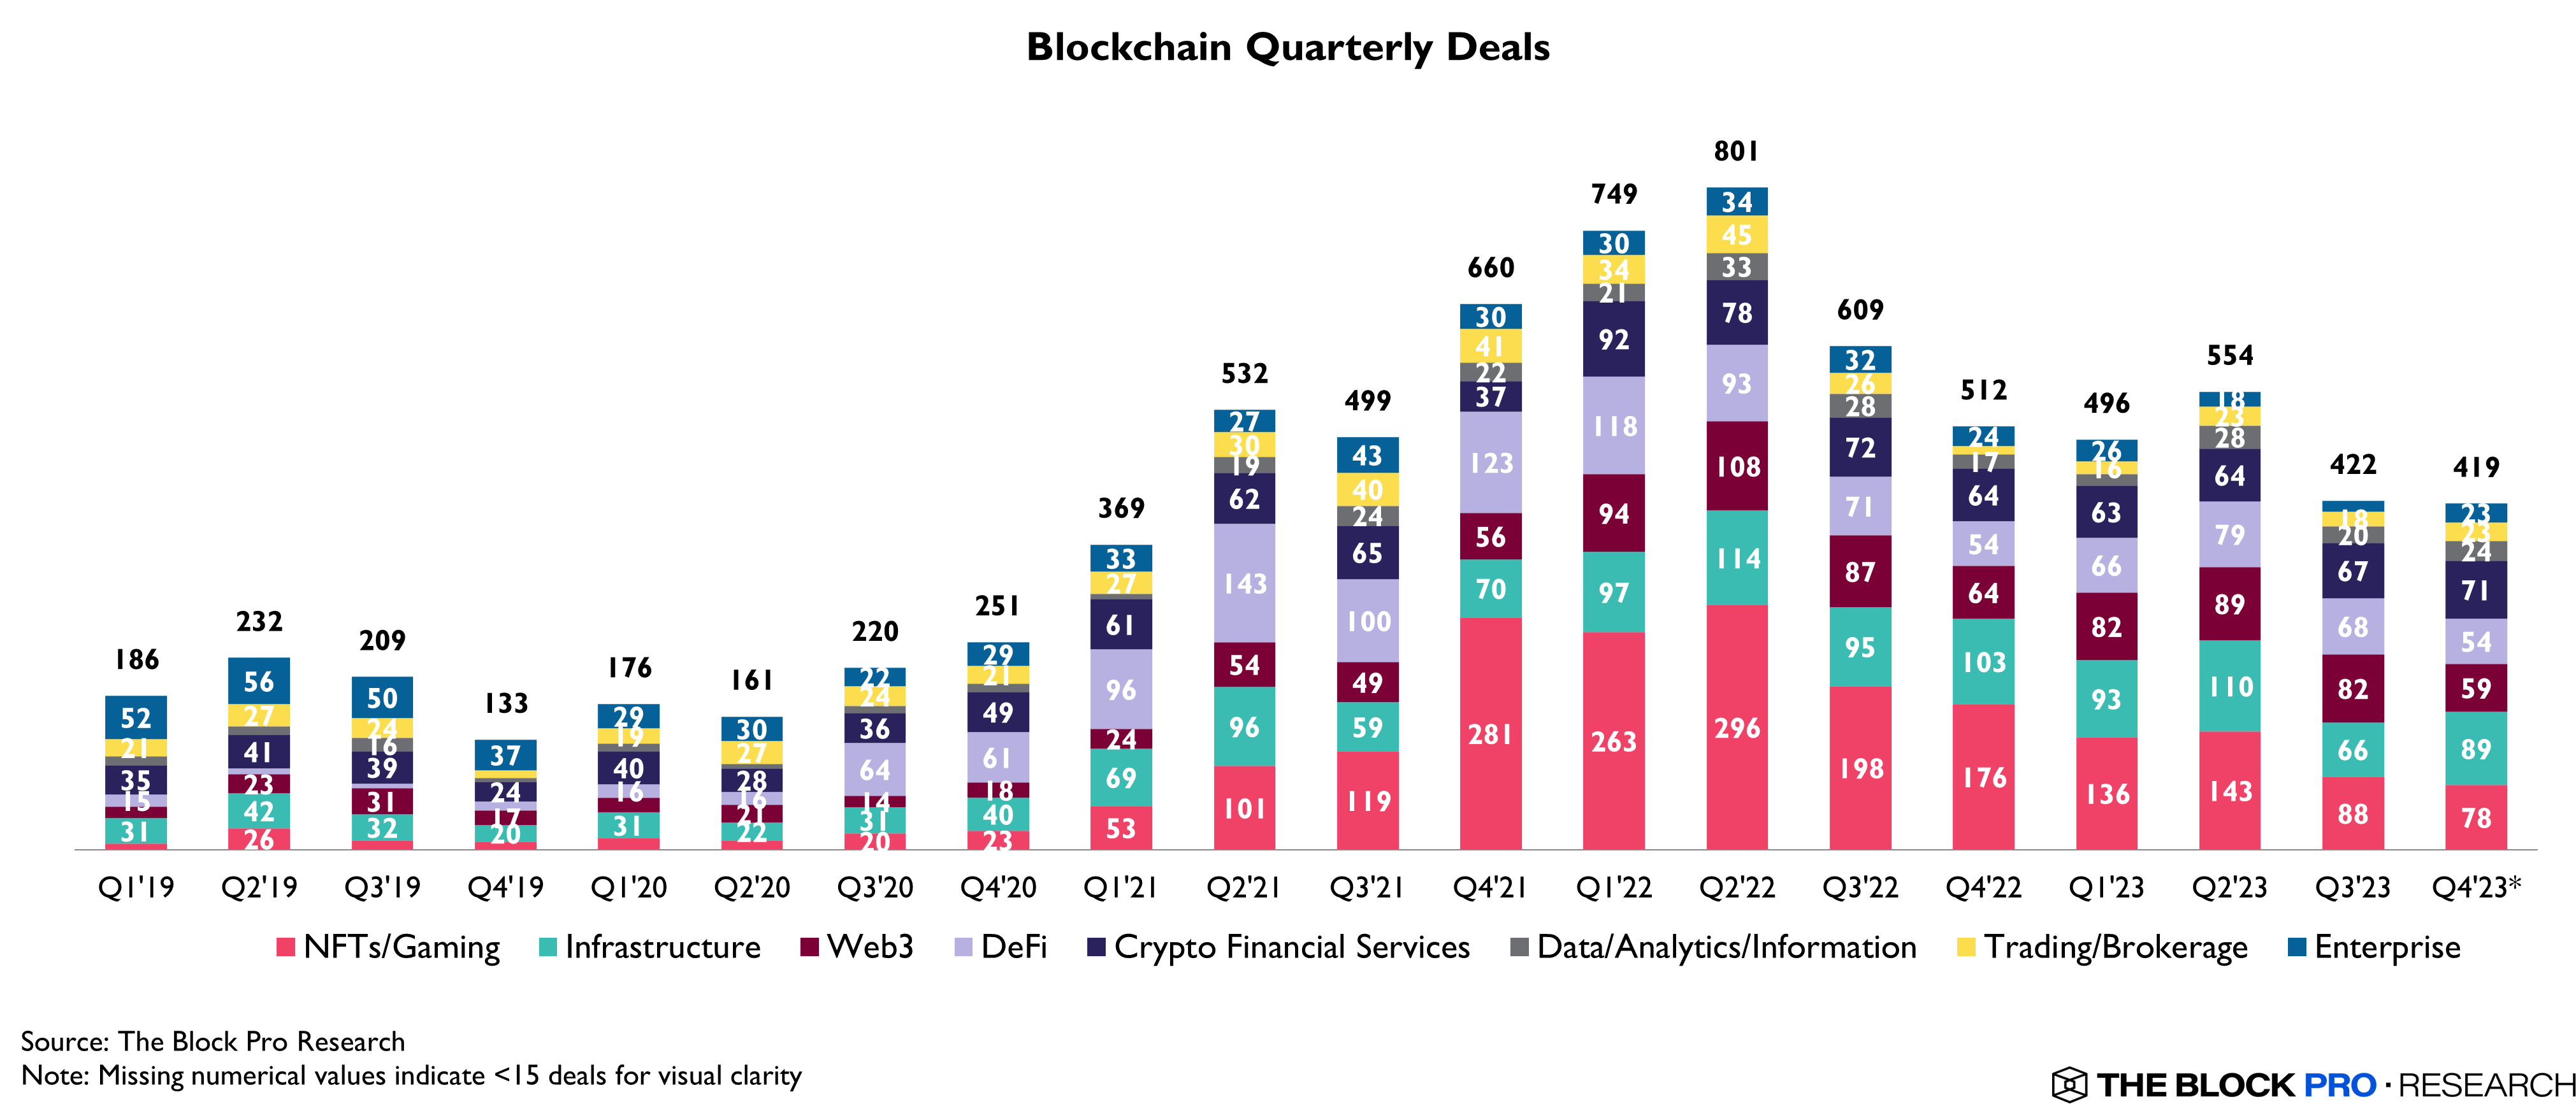 Crypto VC funding took a nosedive in 2023, down 68% compared to the year before